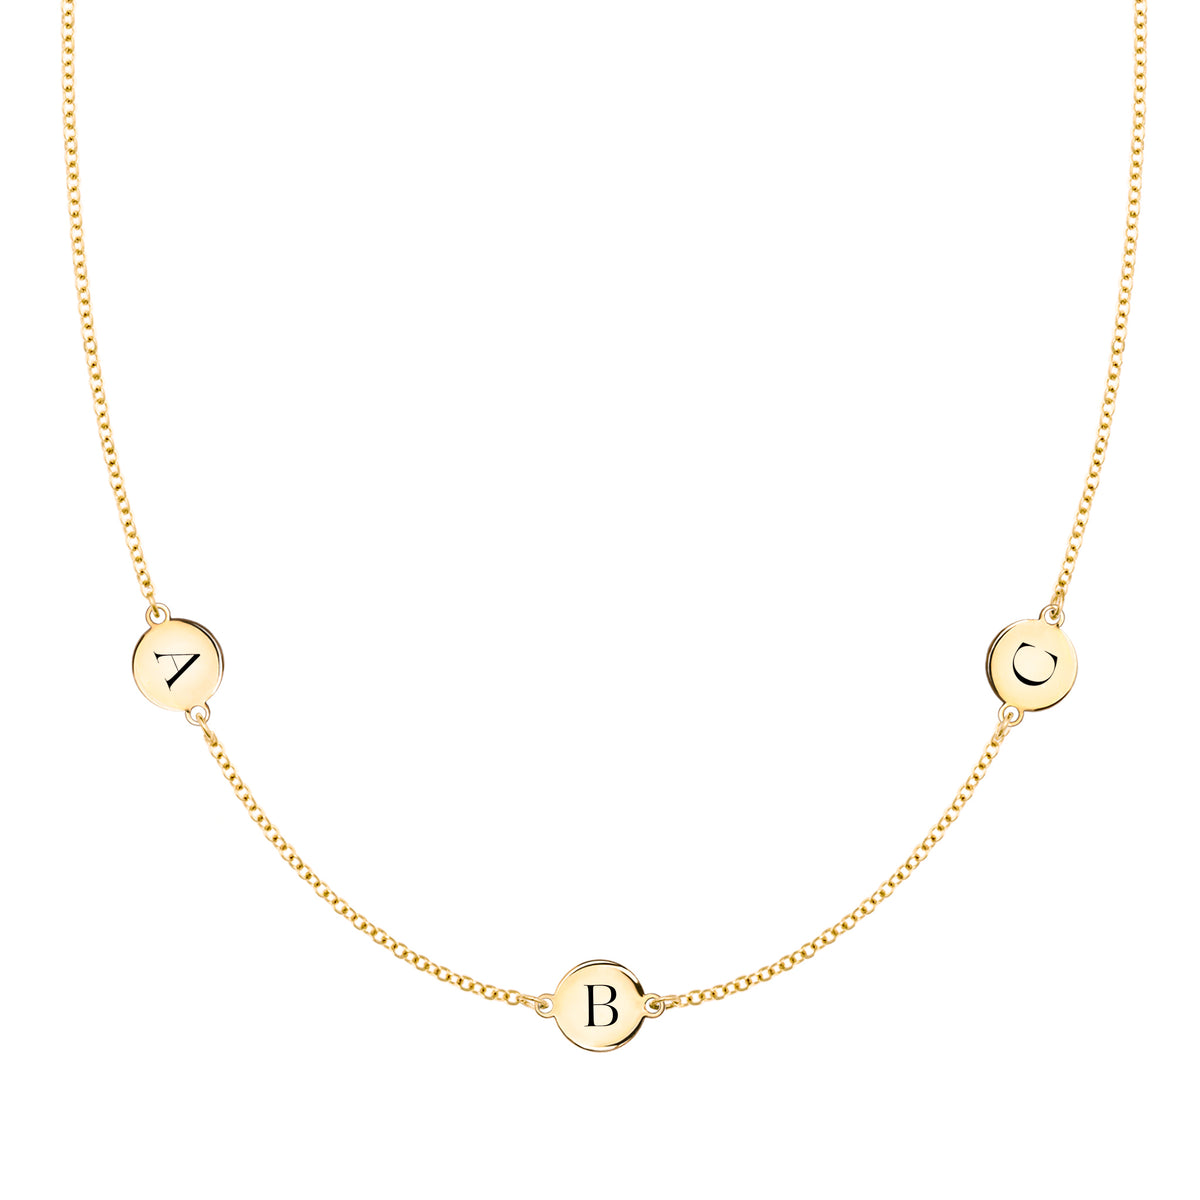 Buy Personalized Monogram Necklace,3 Initial Necklace,18k Gold Plated Monogram  Necklace,nameplate Necklace Letter Jewelry Best Gift Online in India - Etsy